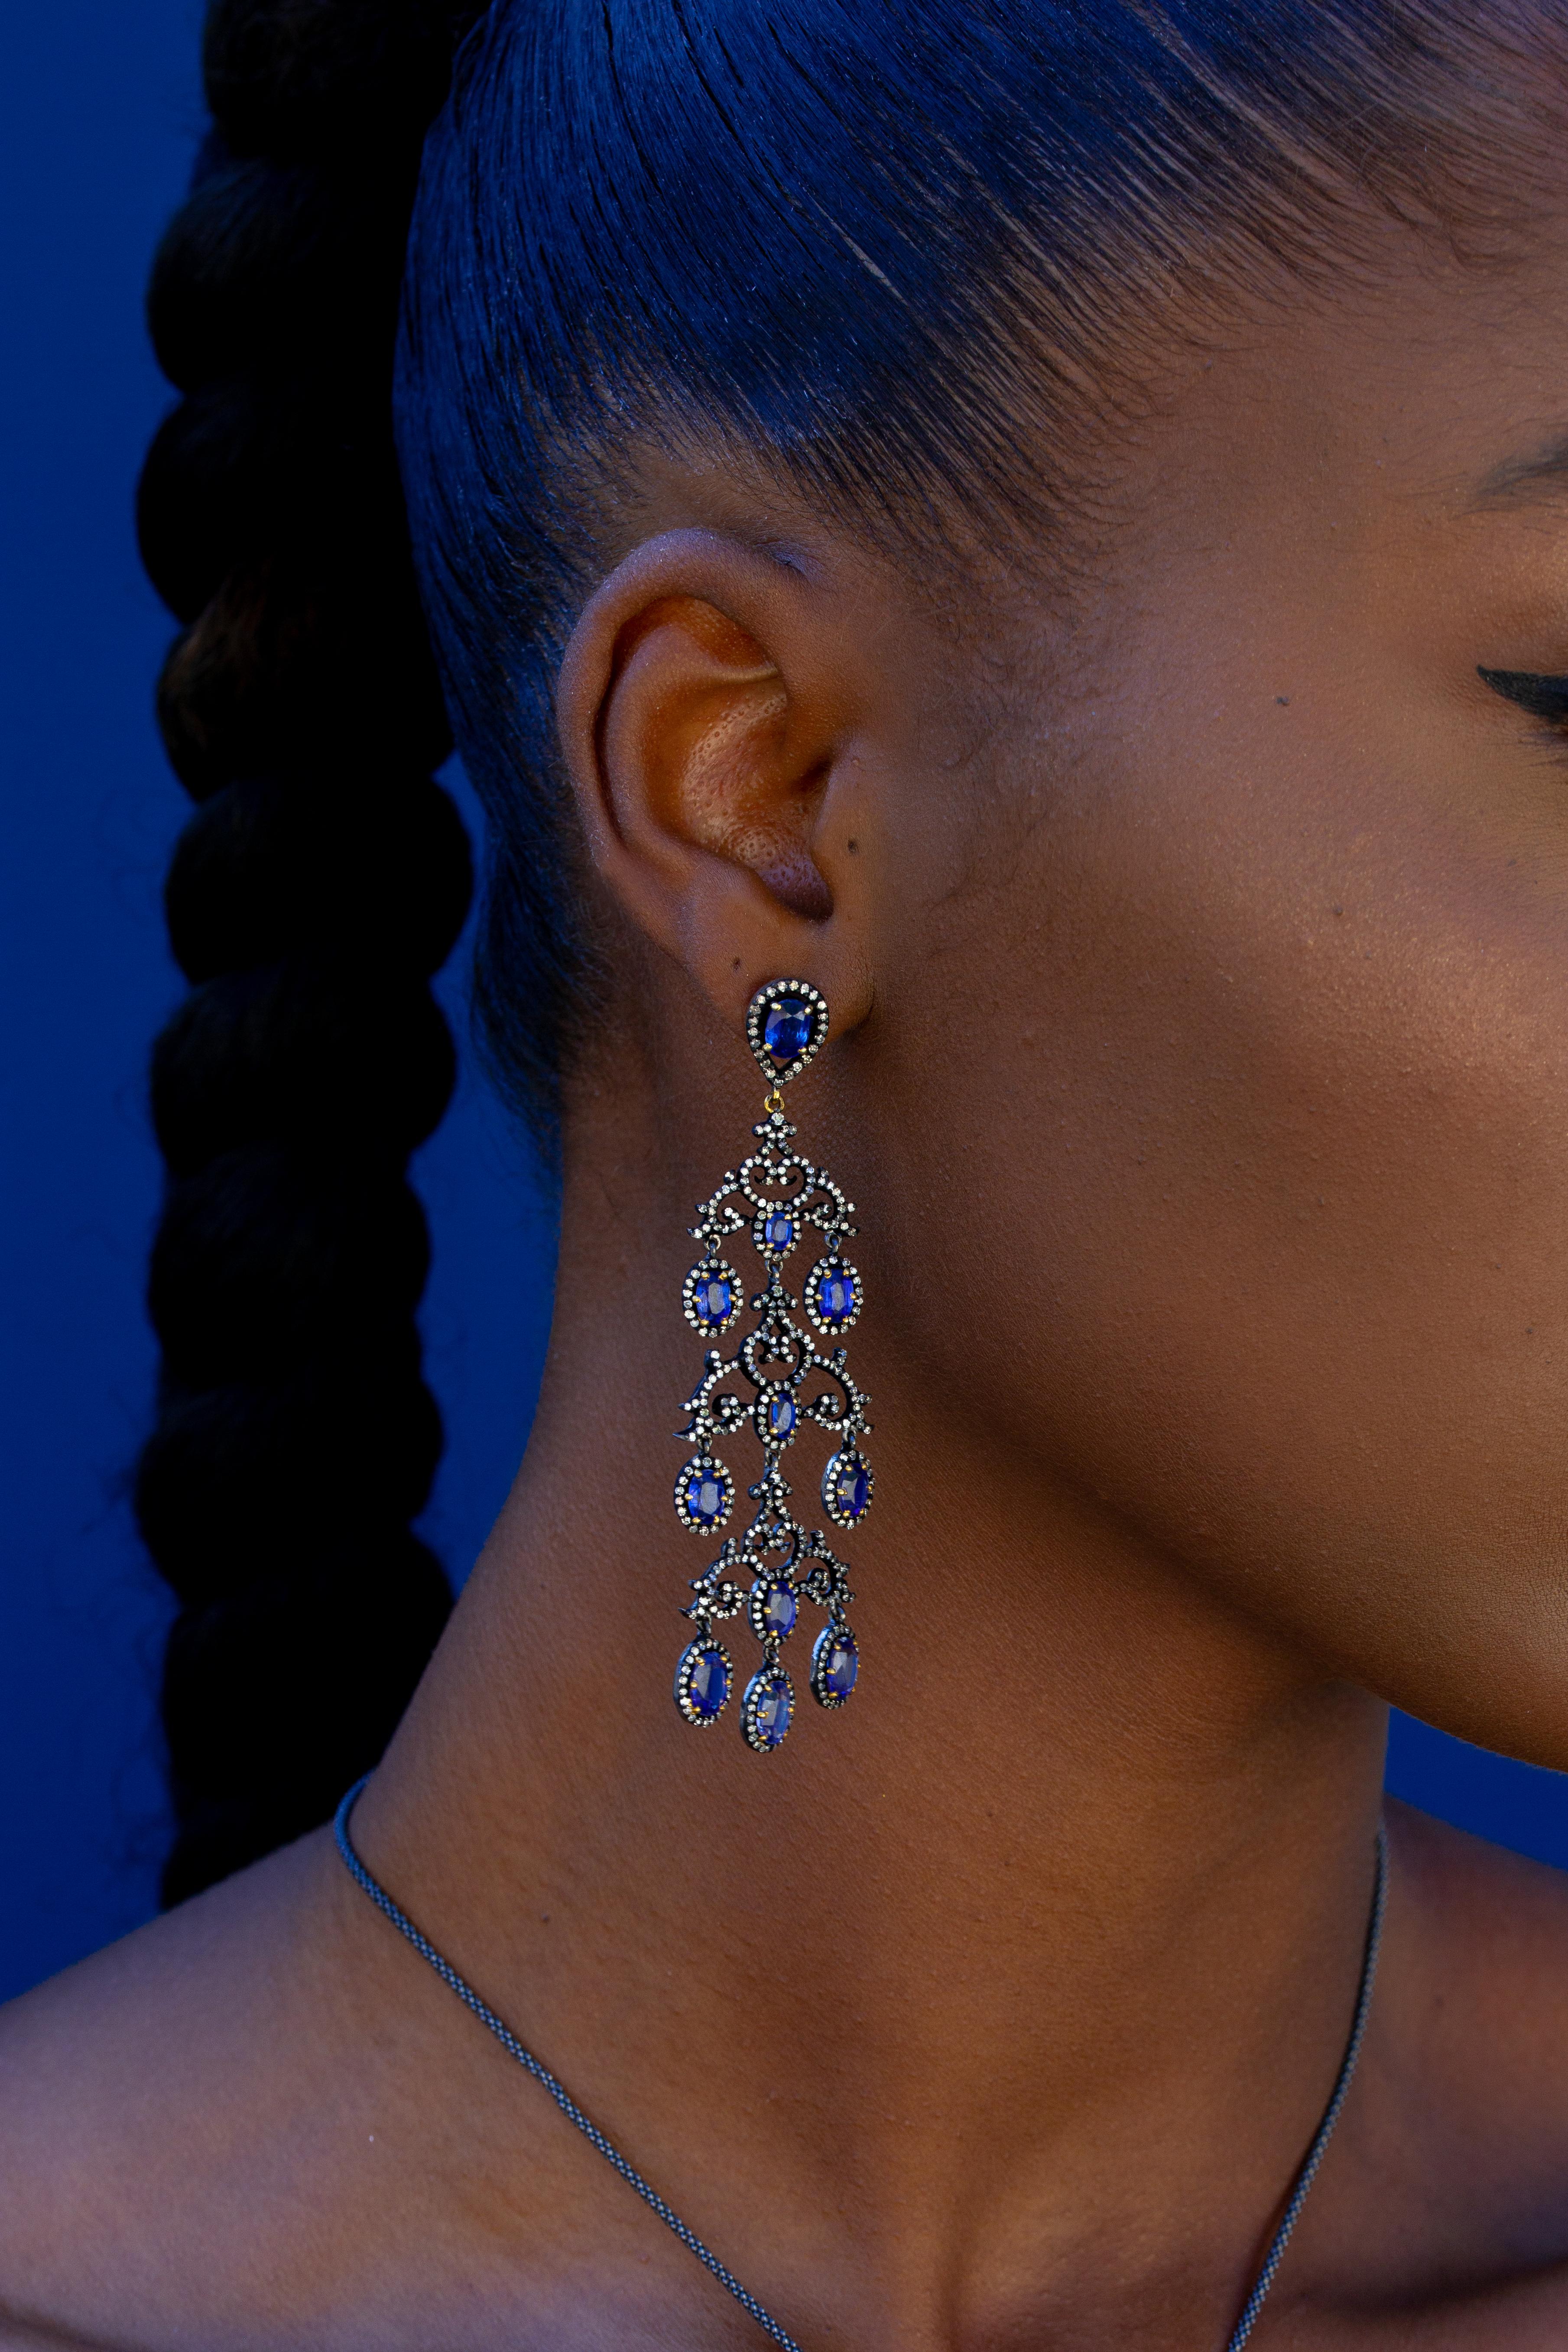 Evoking royalty, this chandelier style earring features Kyanites, accented with diamonds in oxidized silver. This exquisite jewelry piece adds a touch of sophistication and sparkle to any look. It's the perfect way to make a statement.